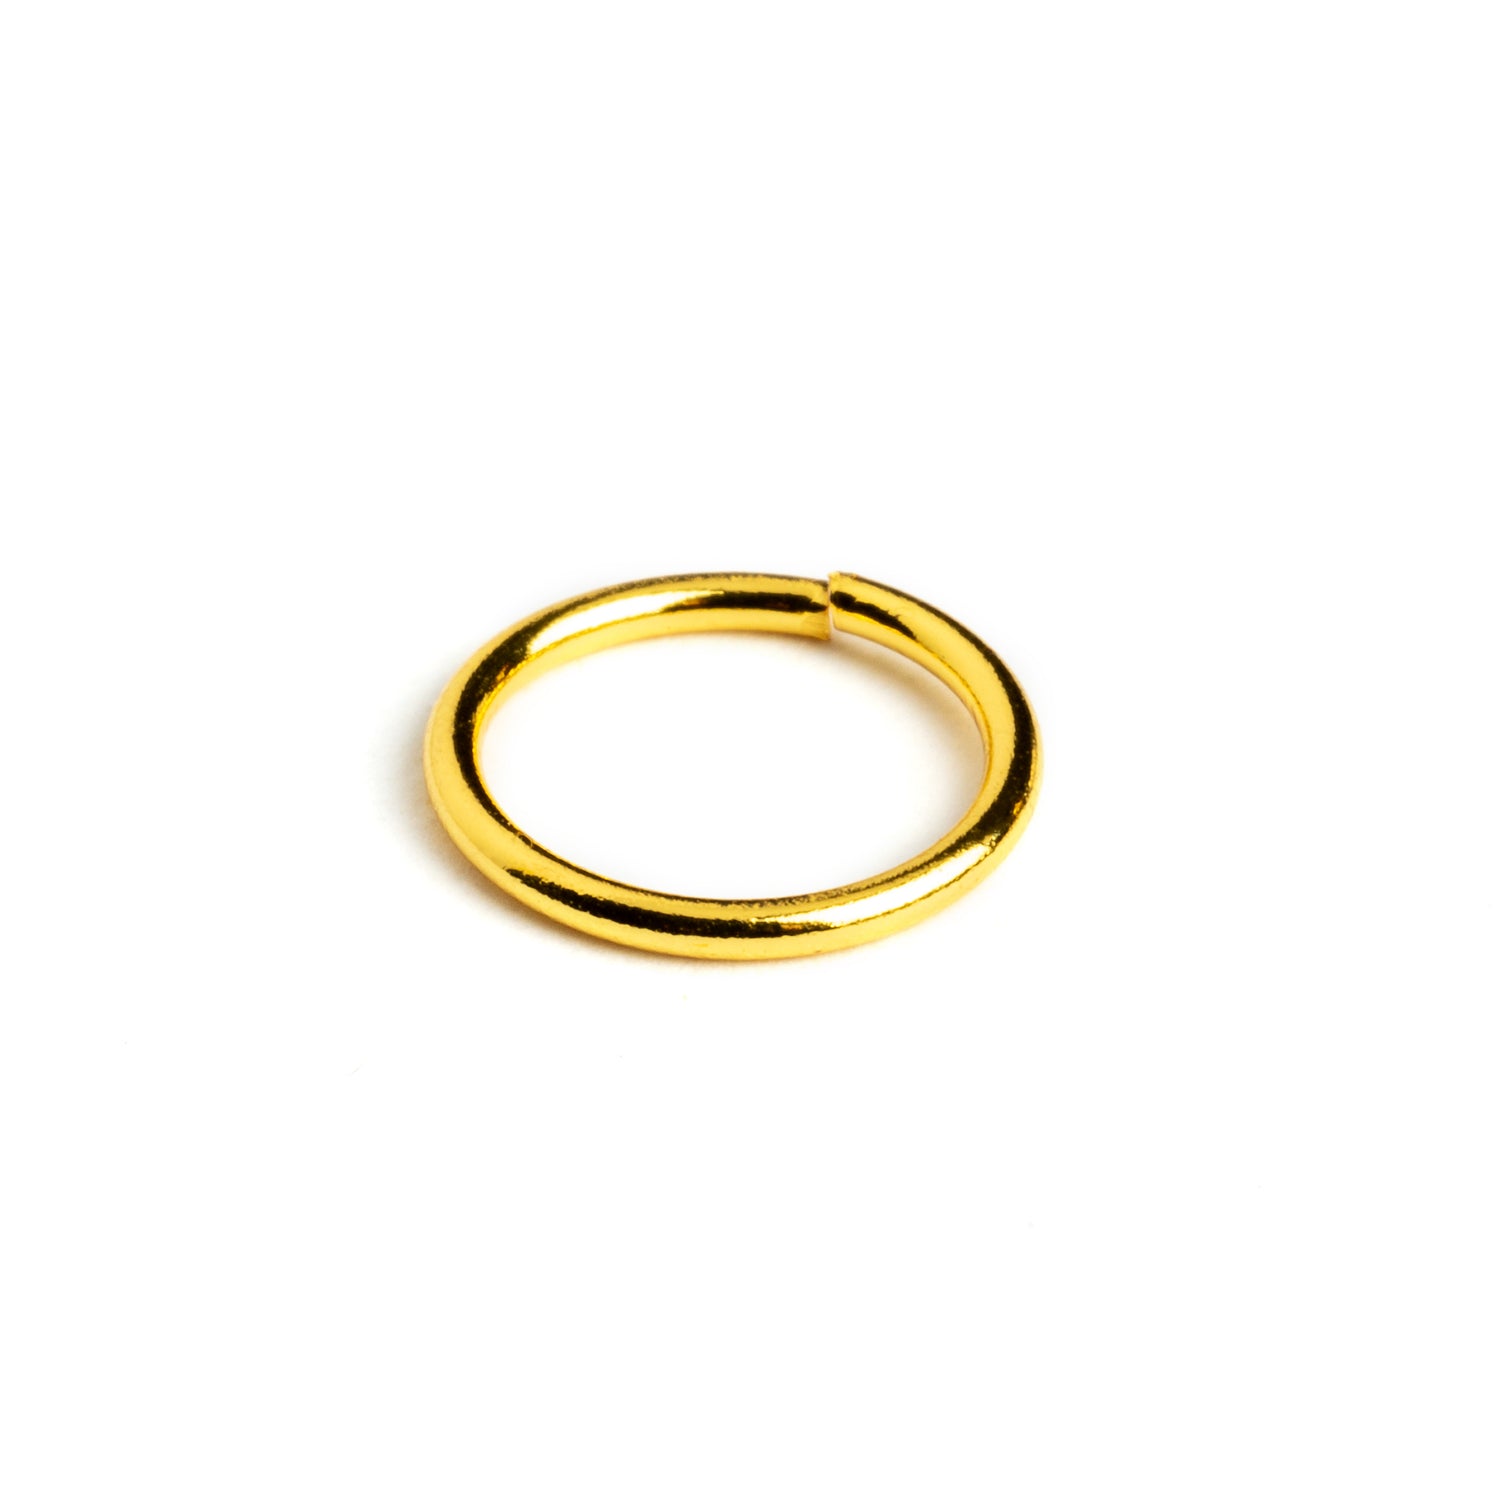 0.8mm/20g 18k Gold seamless nose ring side view